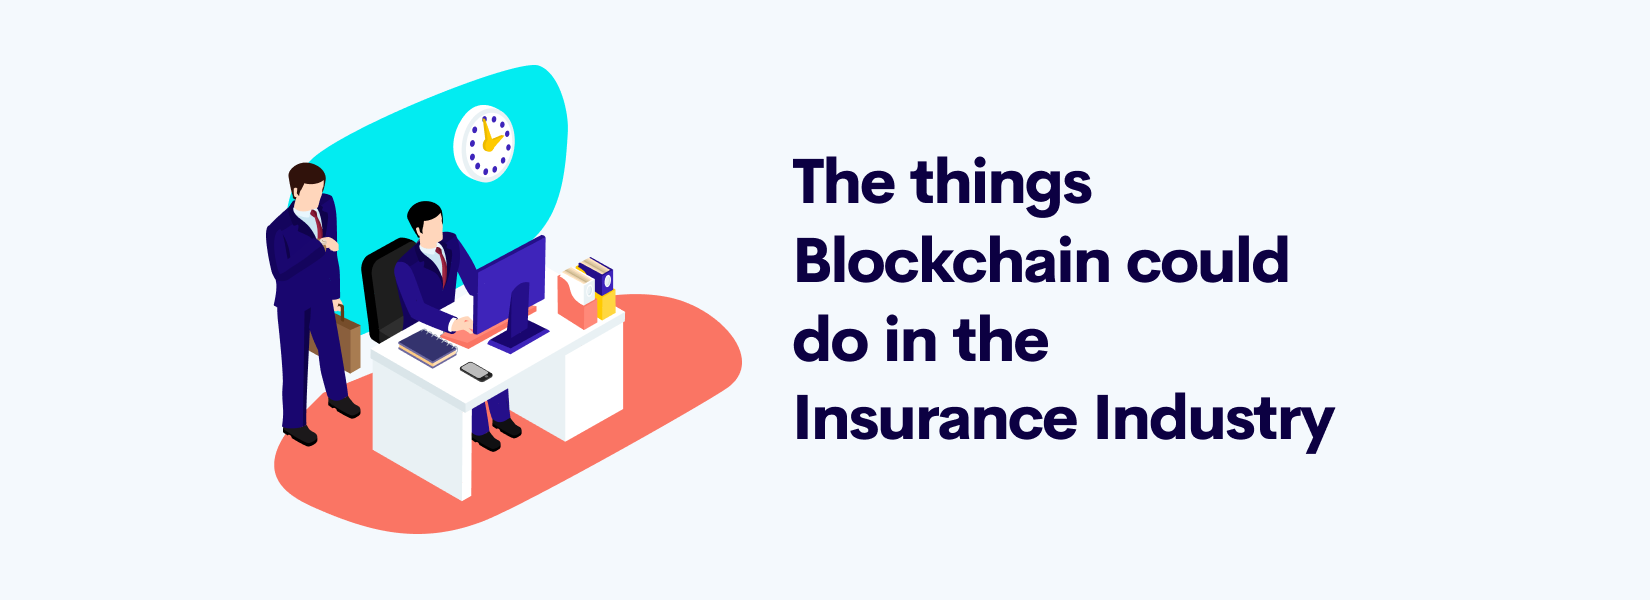 The things Blockchain could do in the Insurance Industry